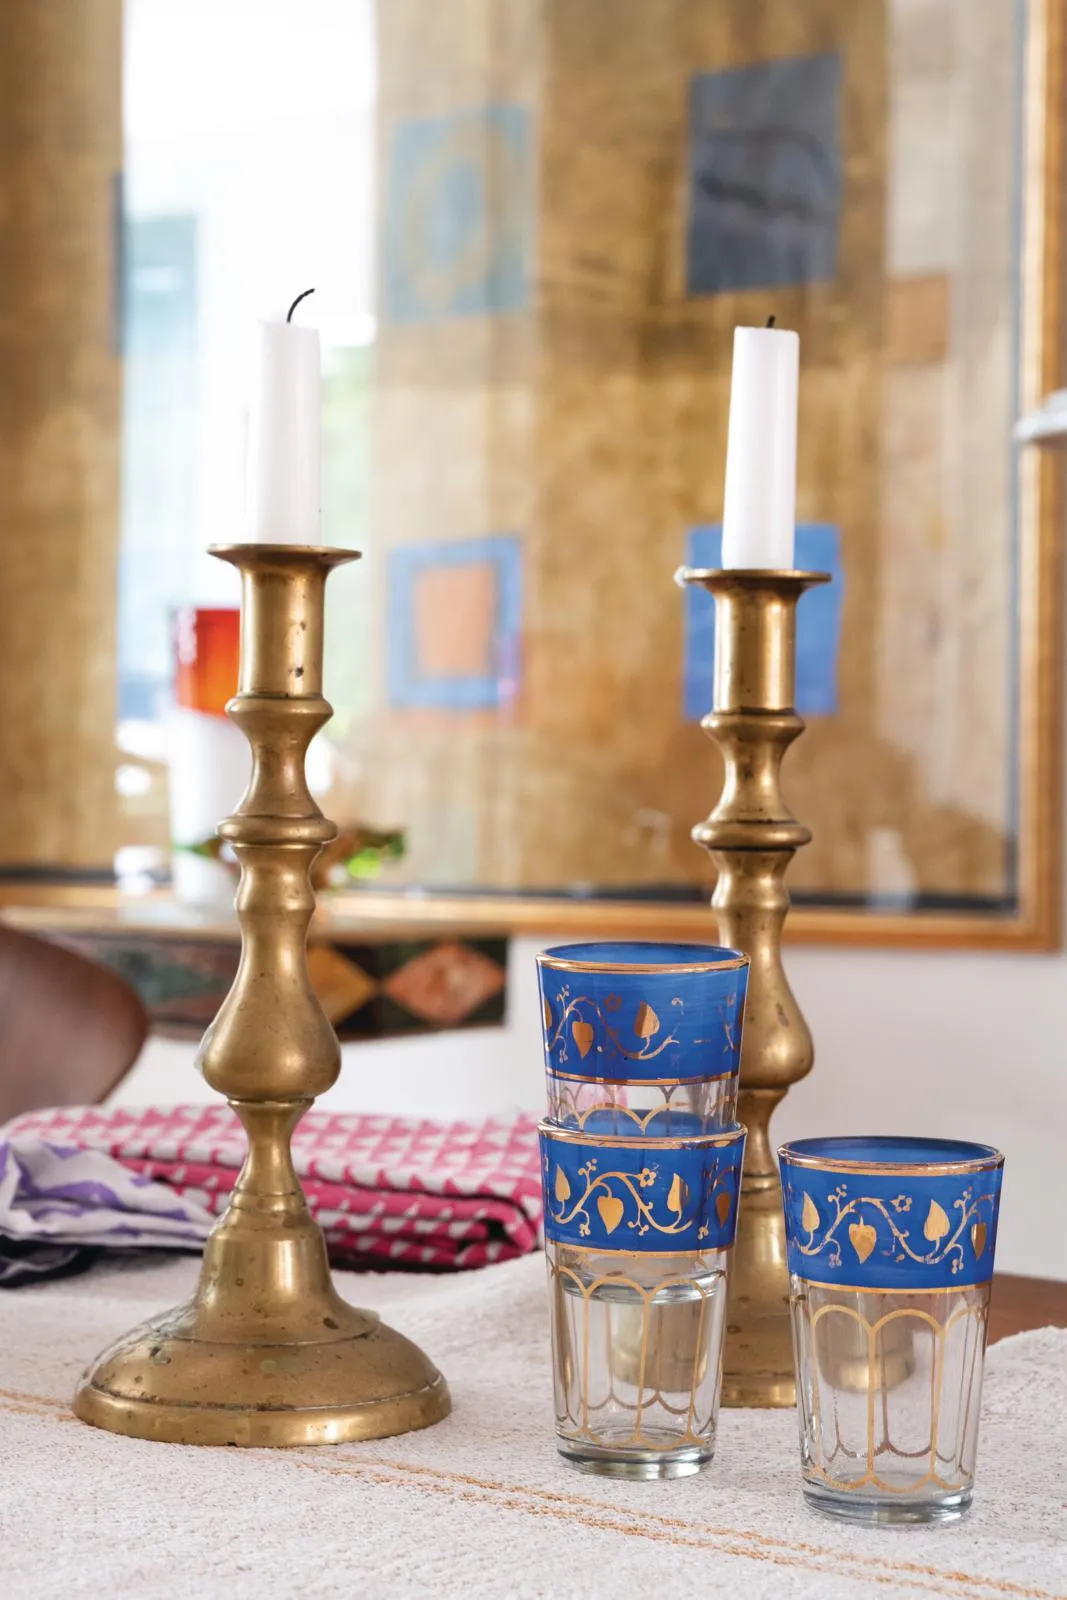 New York townhouse, candlesticks and glasses